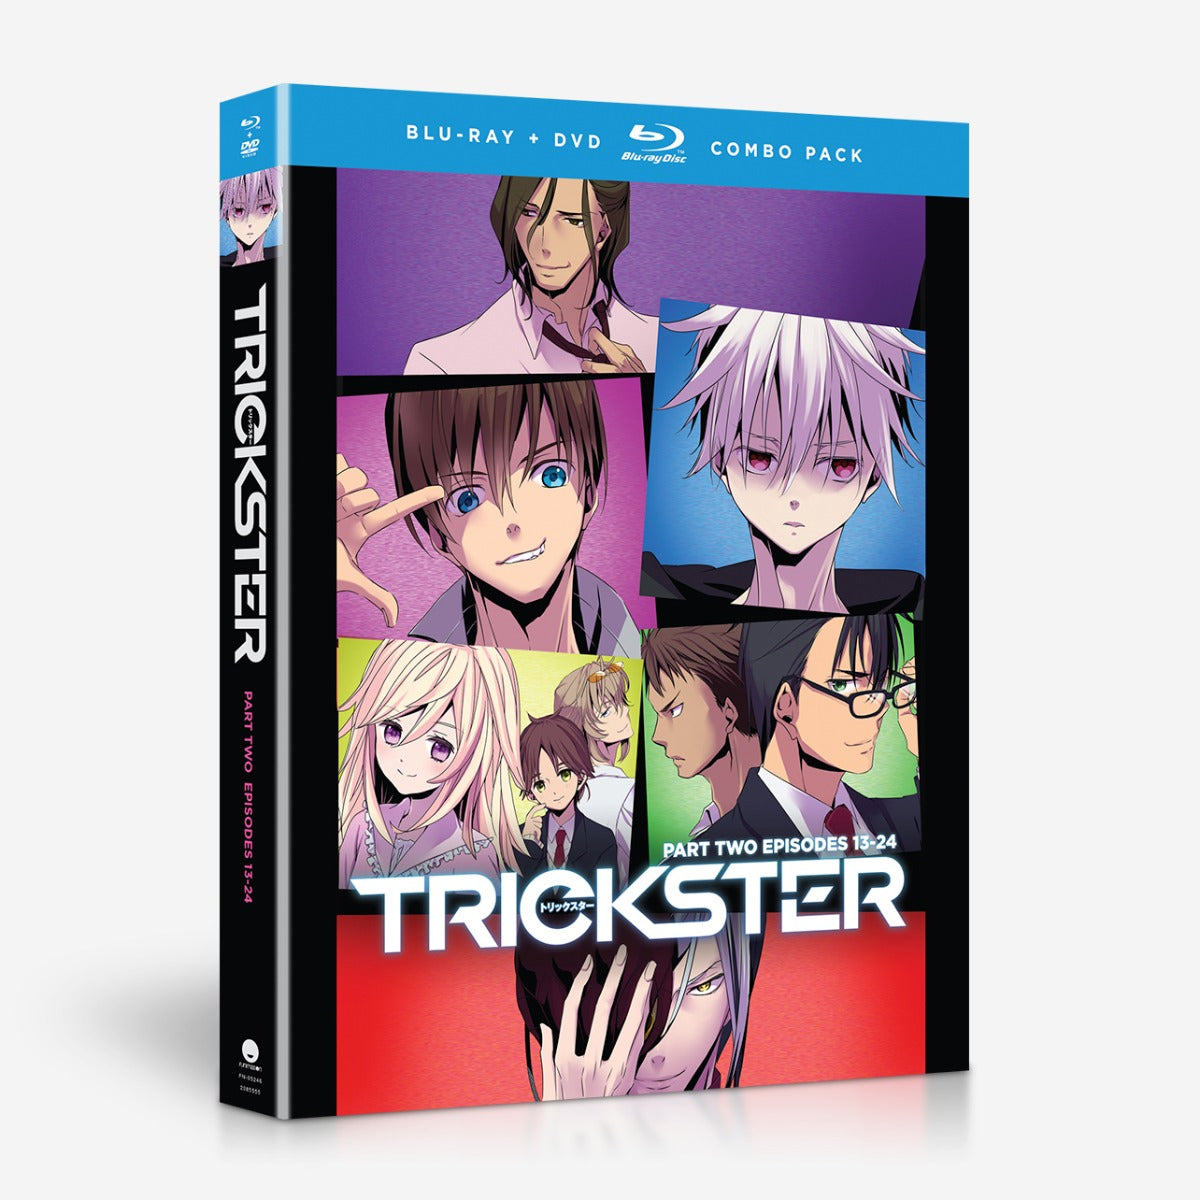 Trickster - Part 2 - Blu-ray + DVD image count 0